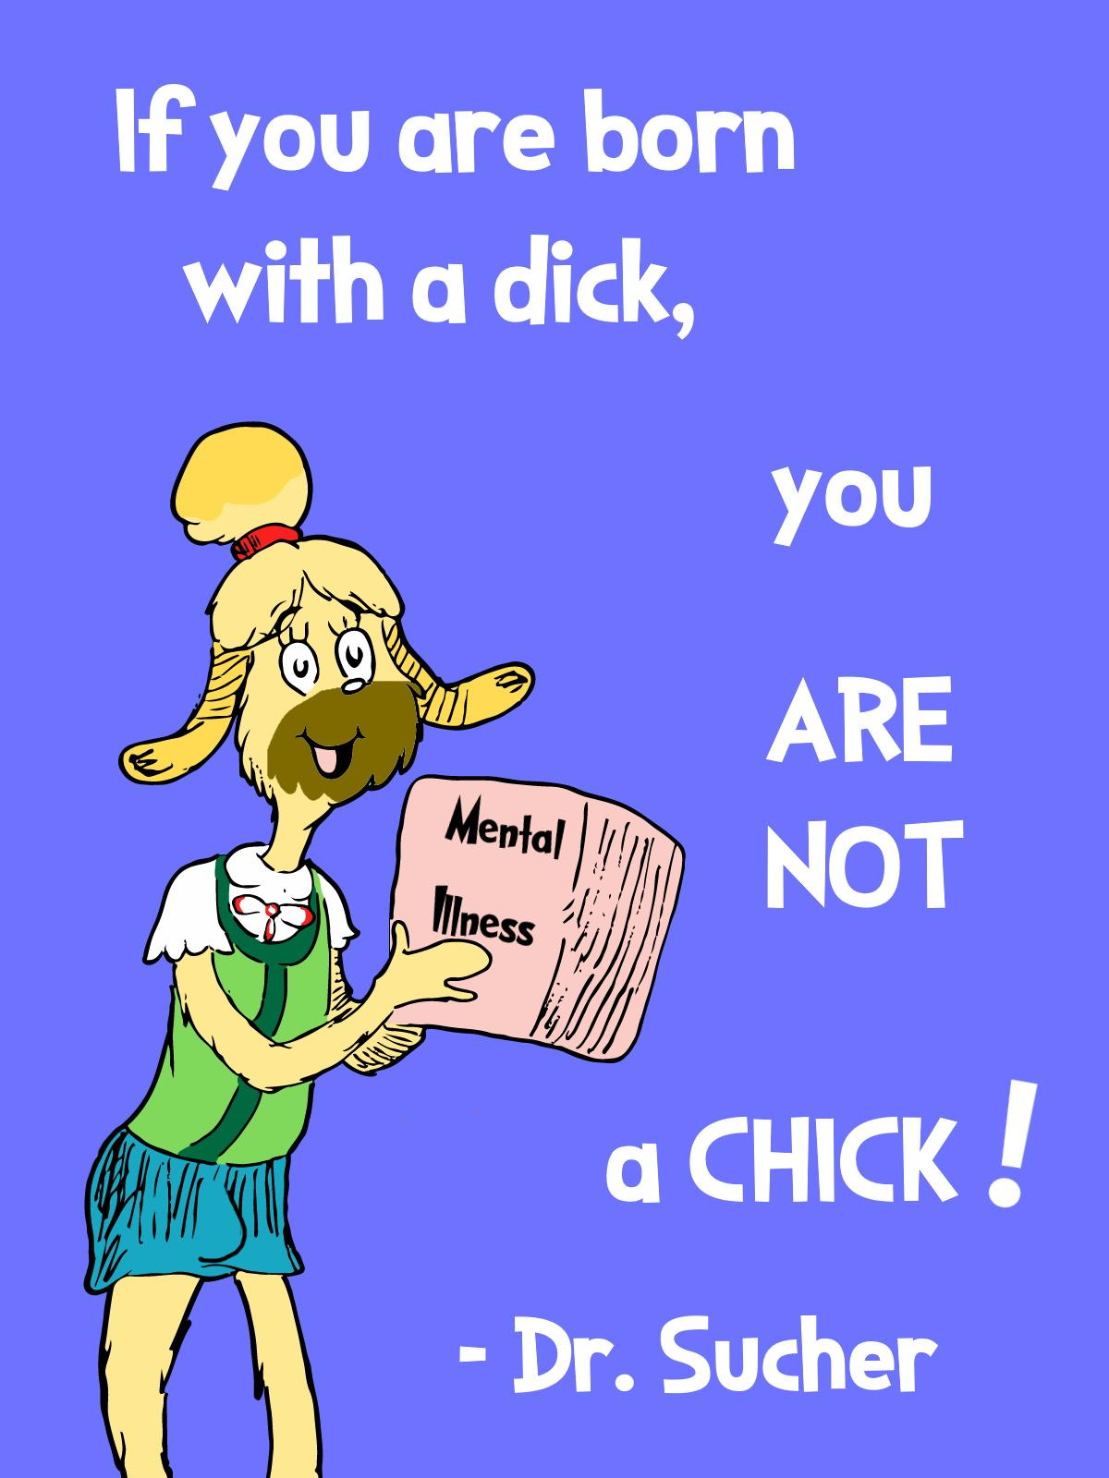 If youre born with a dick youre not a chick